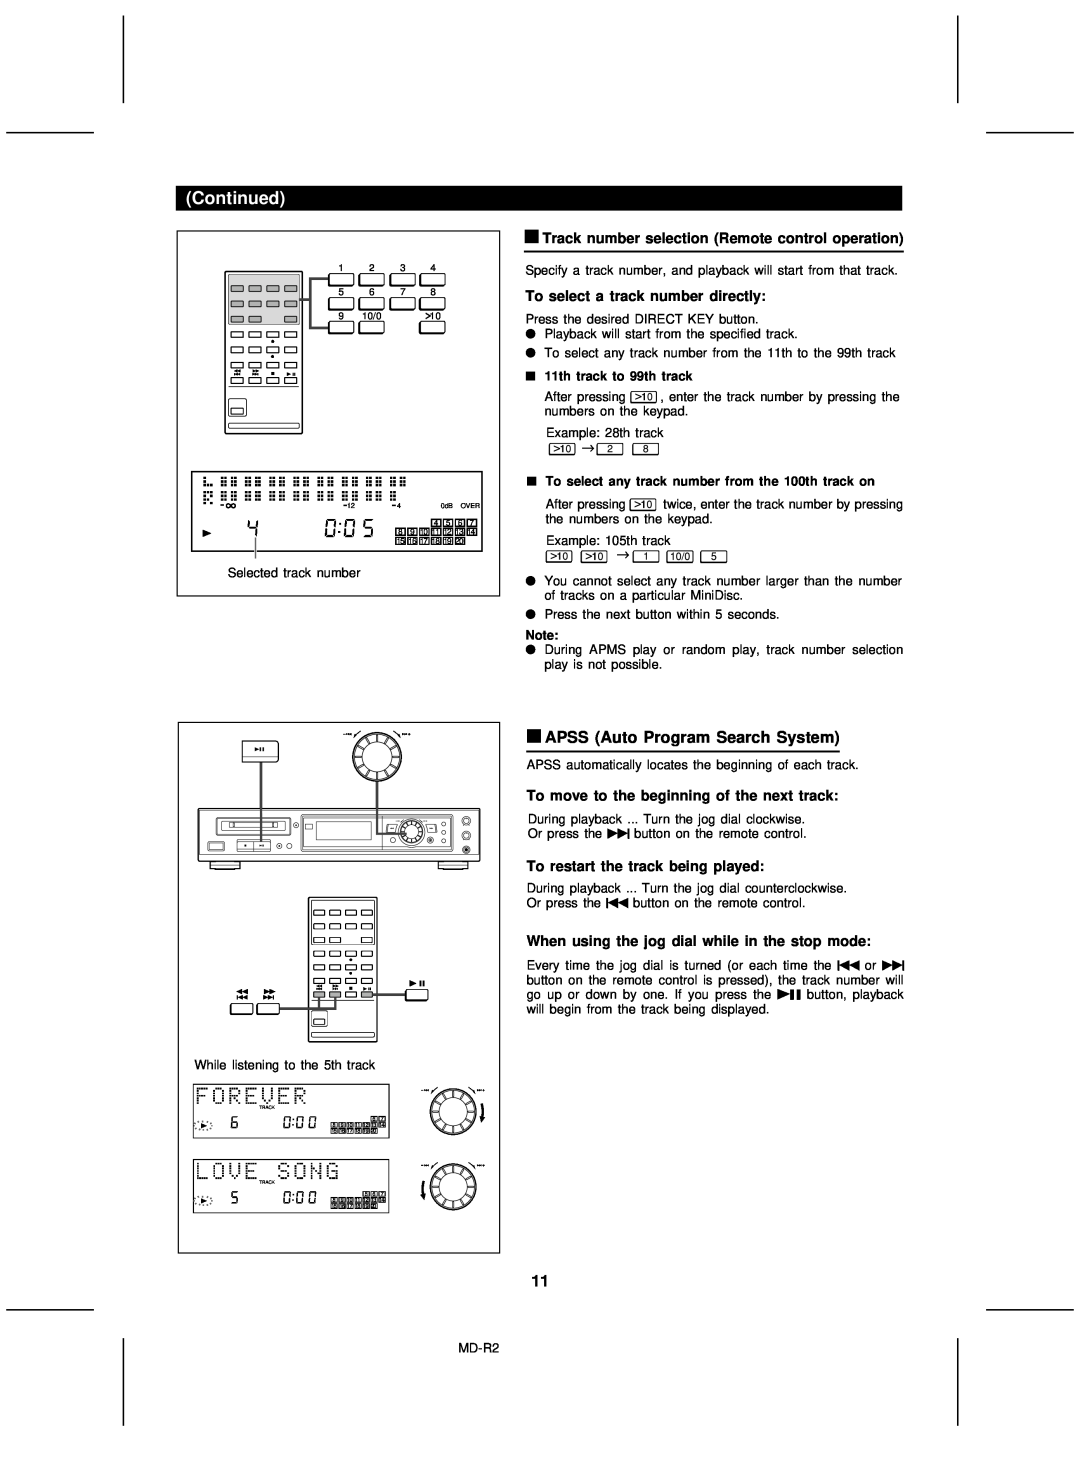 Kenwood MD-R2 operation manual APSS Auto Program Search System, Track number selection Remote control operation 